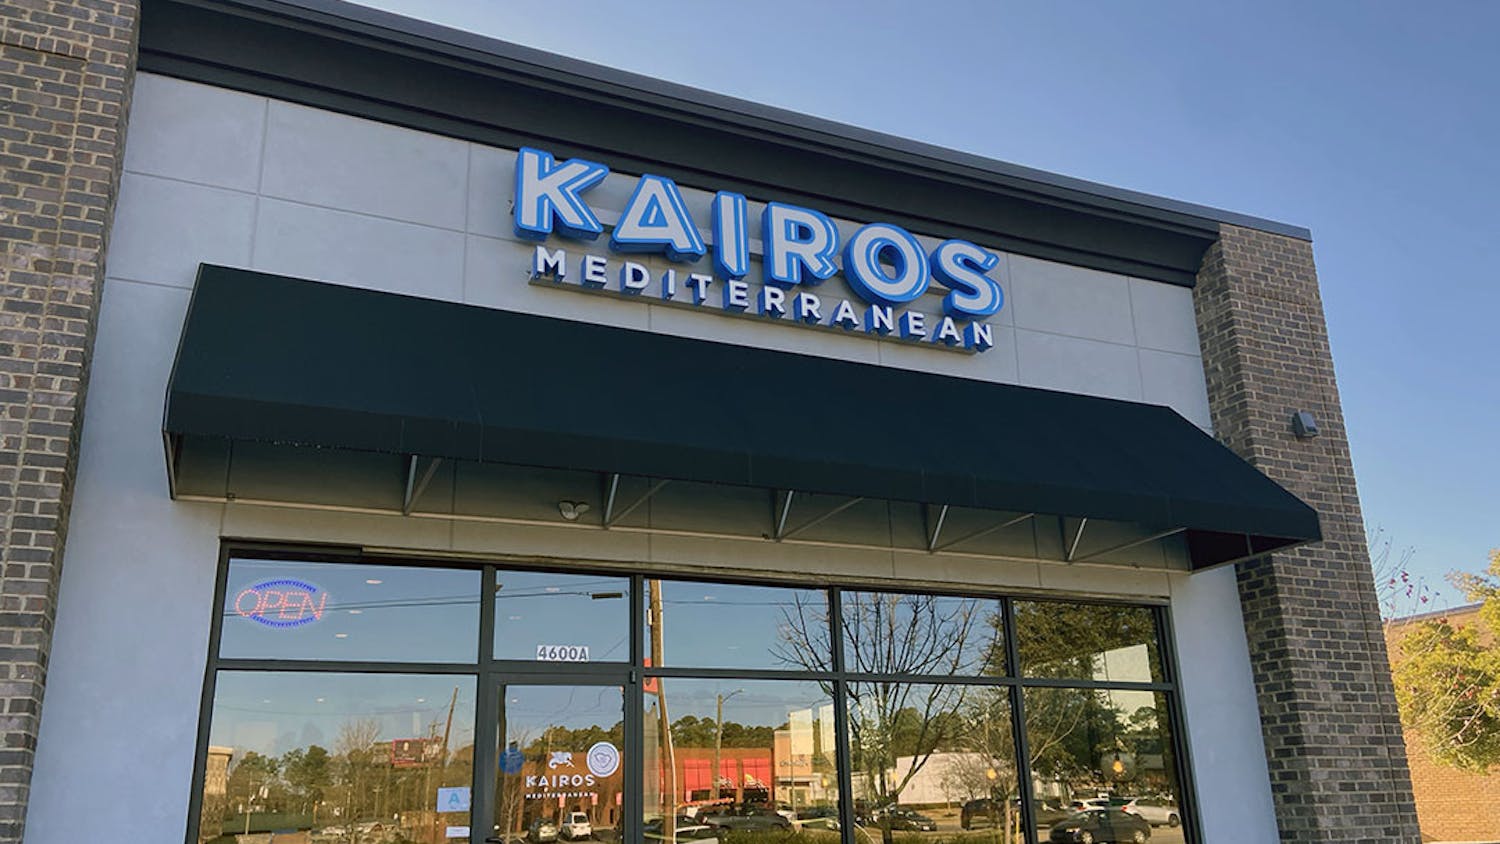 Kairos Mediterranean, located on Divine Street, serves fresh Mediterranean food. It’s a great restaurant for students wanting to try something new and nutritious.